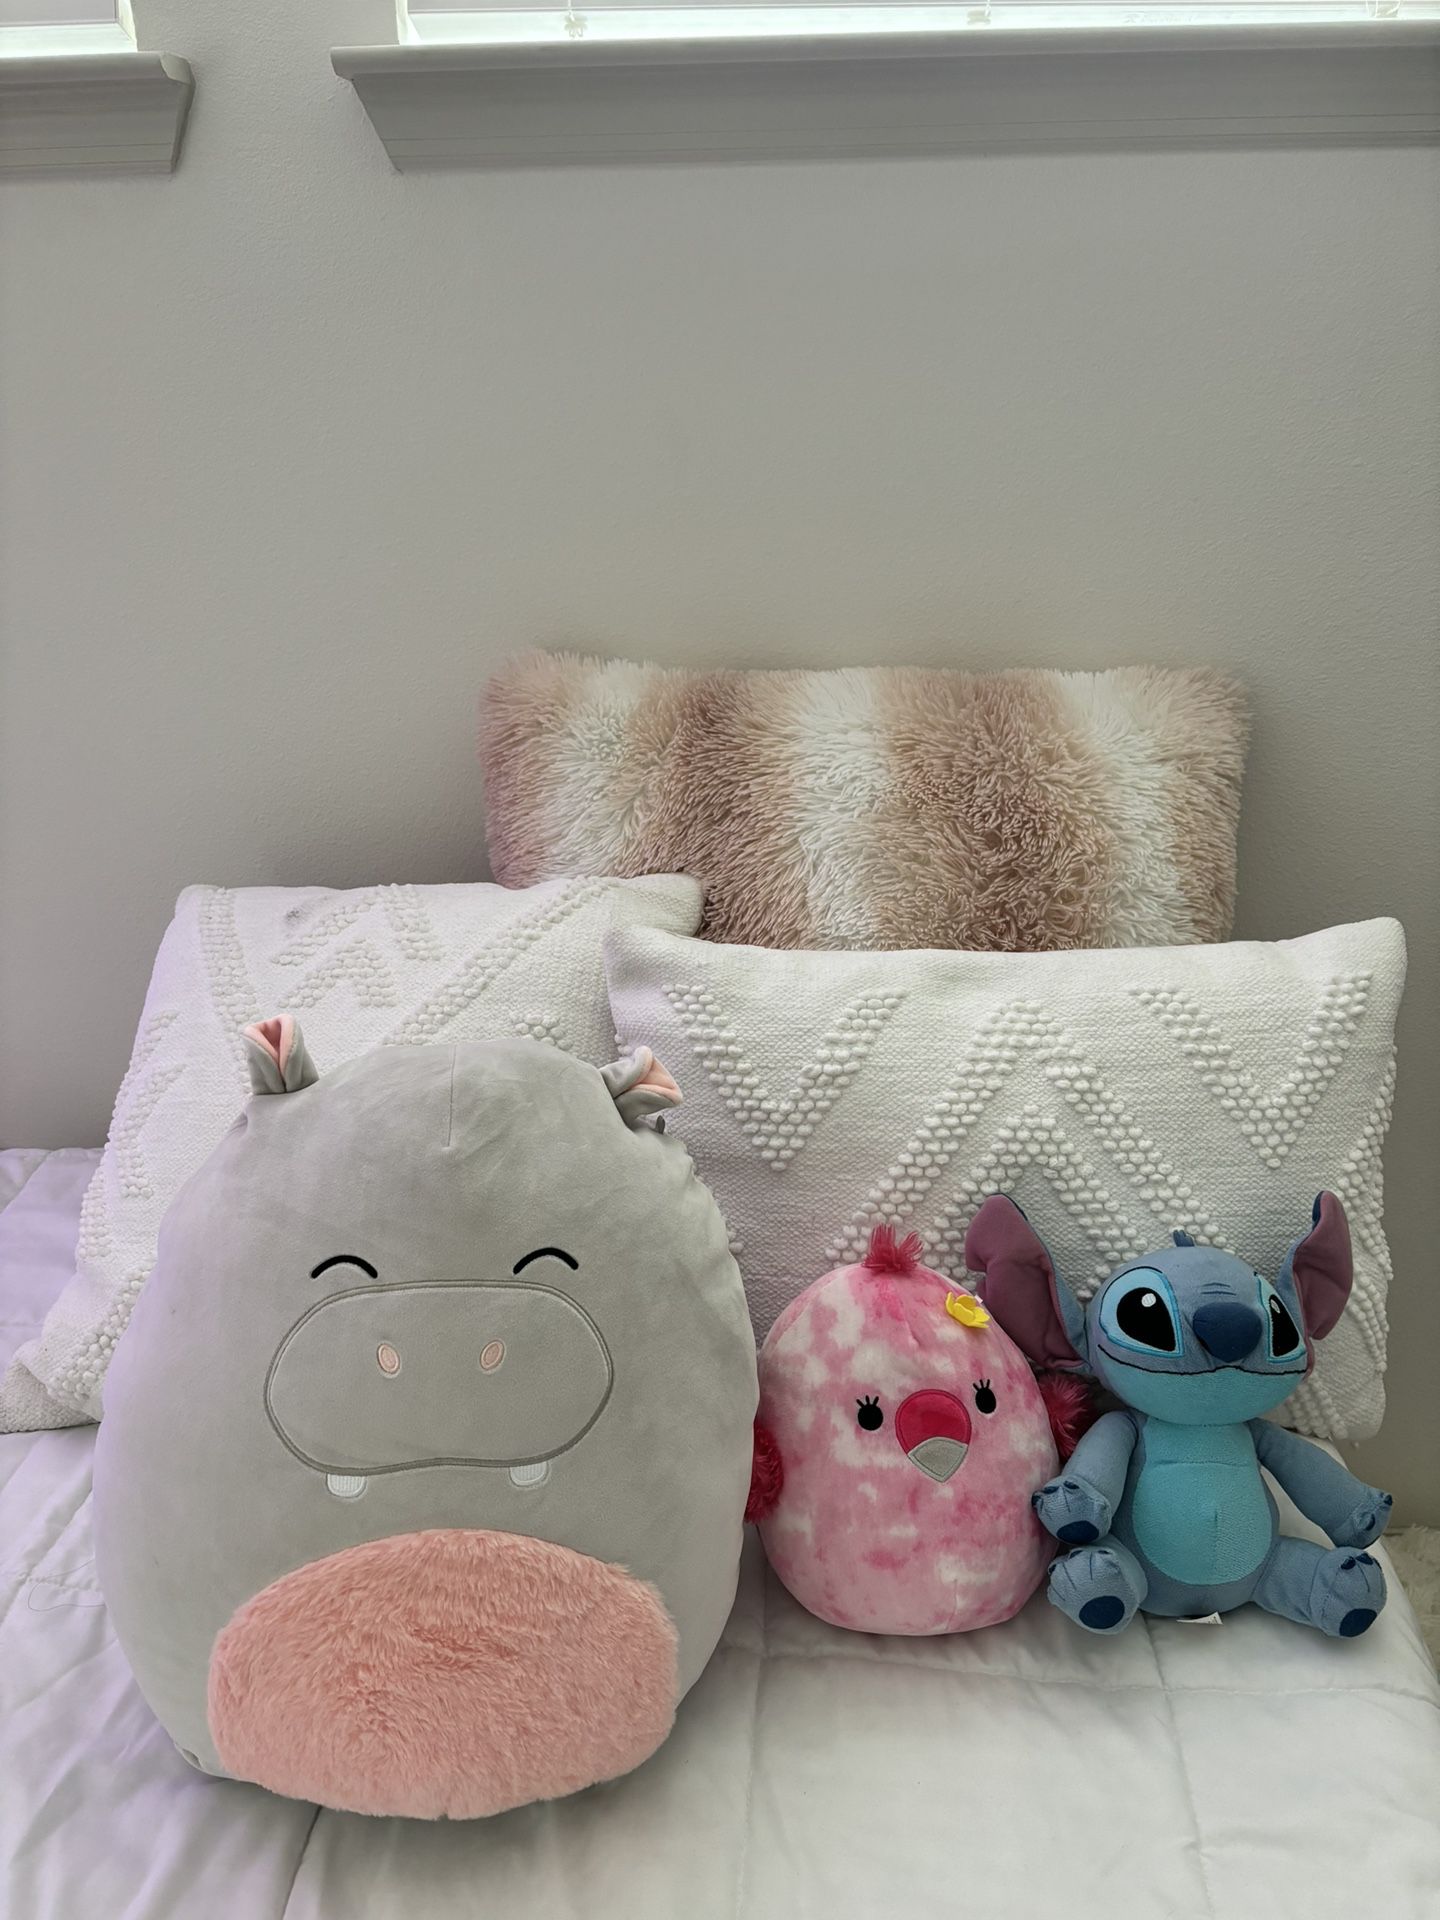 3 Pillows And 3 Stuffed Animals 